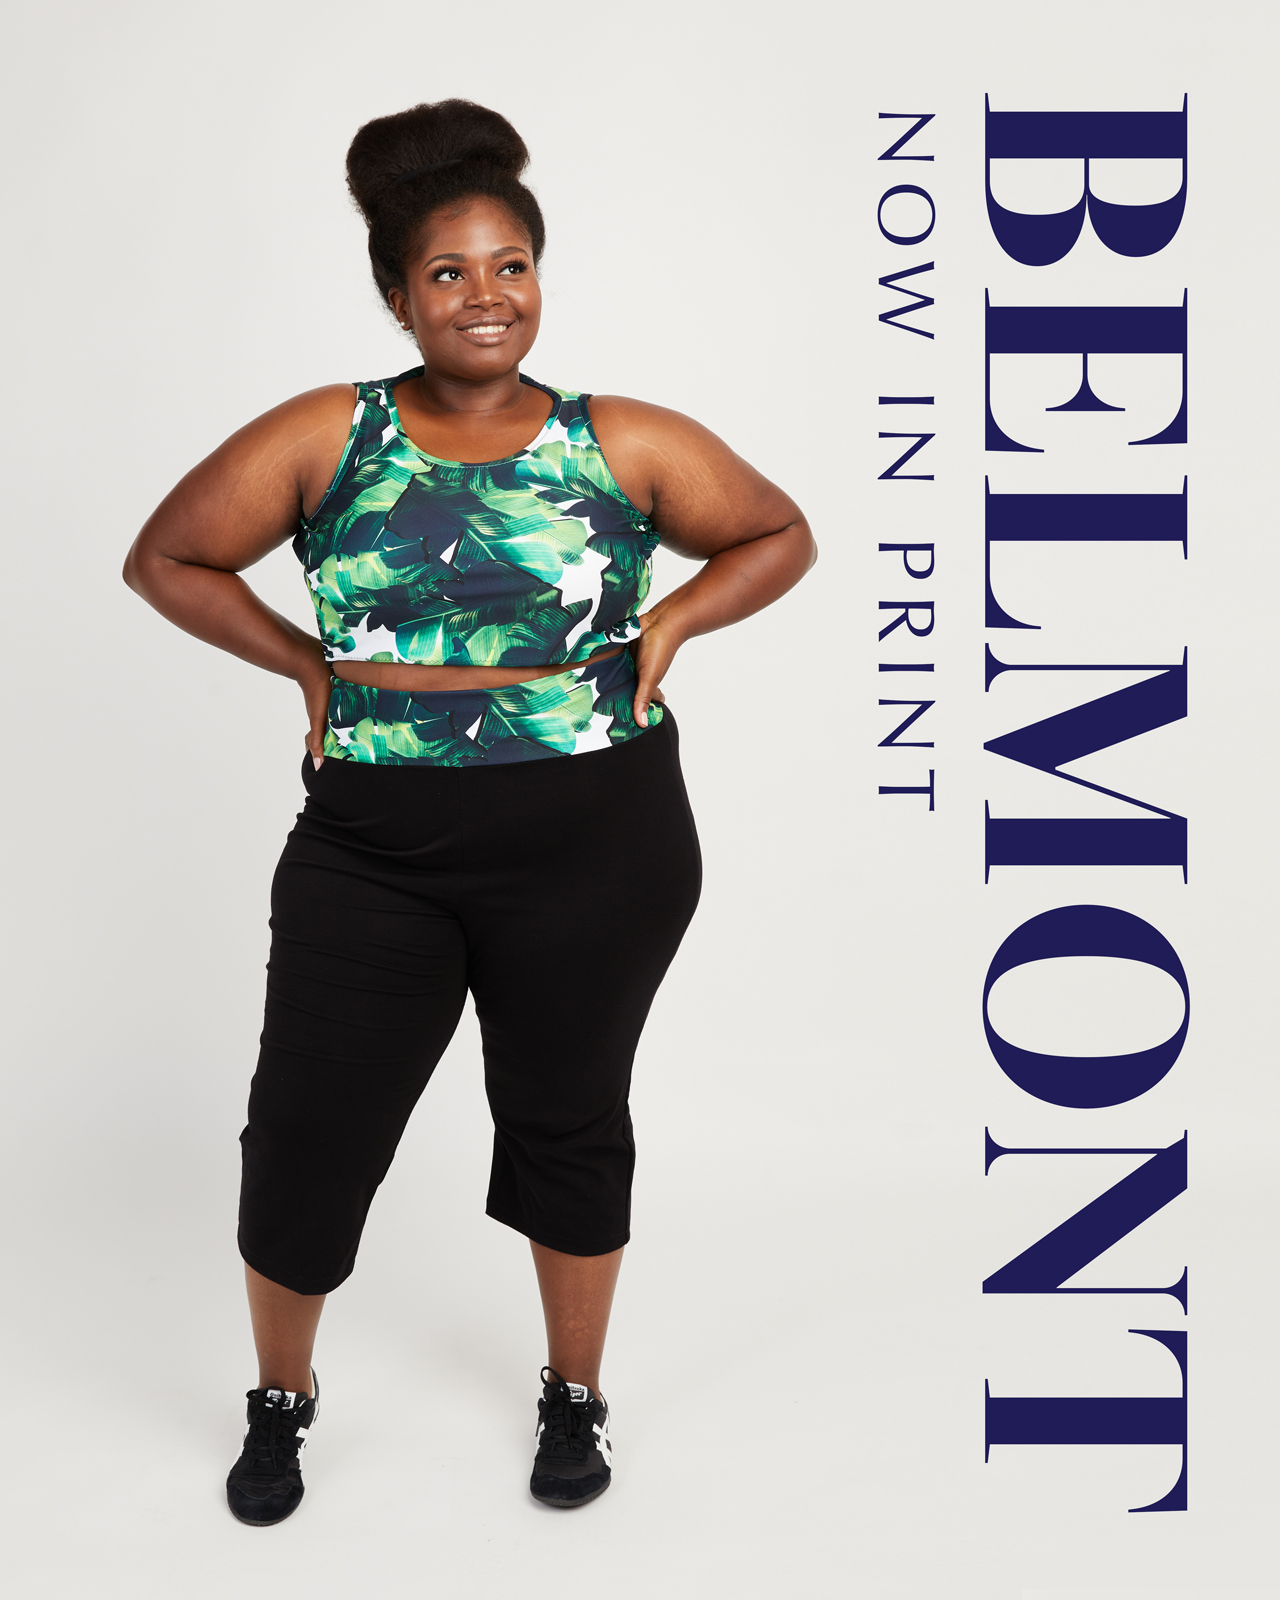 Belmont Leggings, now in print! Plus activewear collection in